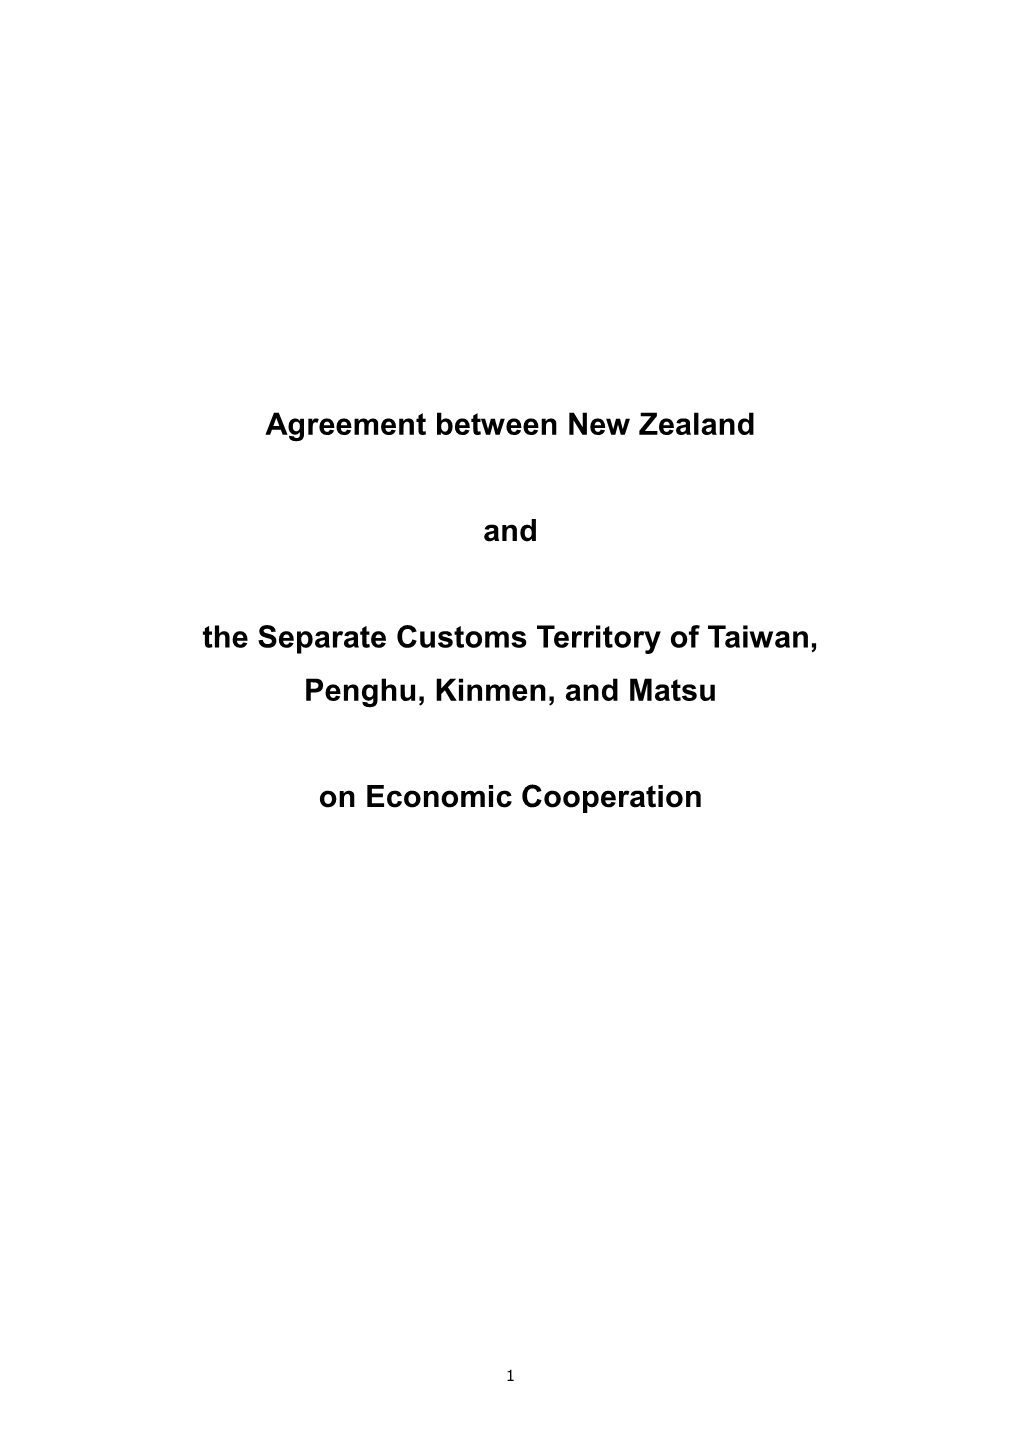 AGREEMENT BETWEEN NEW ZEALAND and the SEPARATE CUSTOMS TERRITORY of TAIWAN, PENGHU, KINMEN, and MATSU • Annex